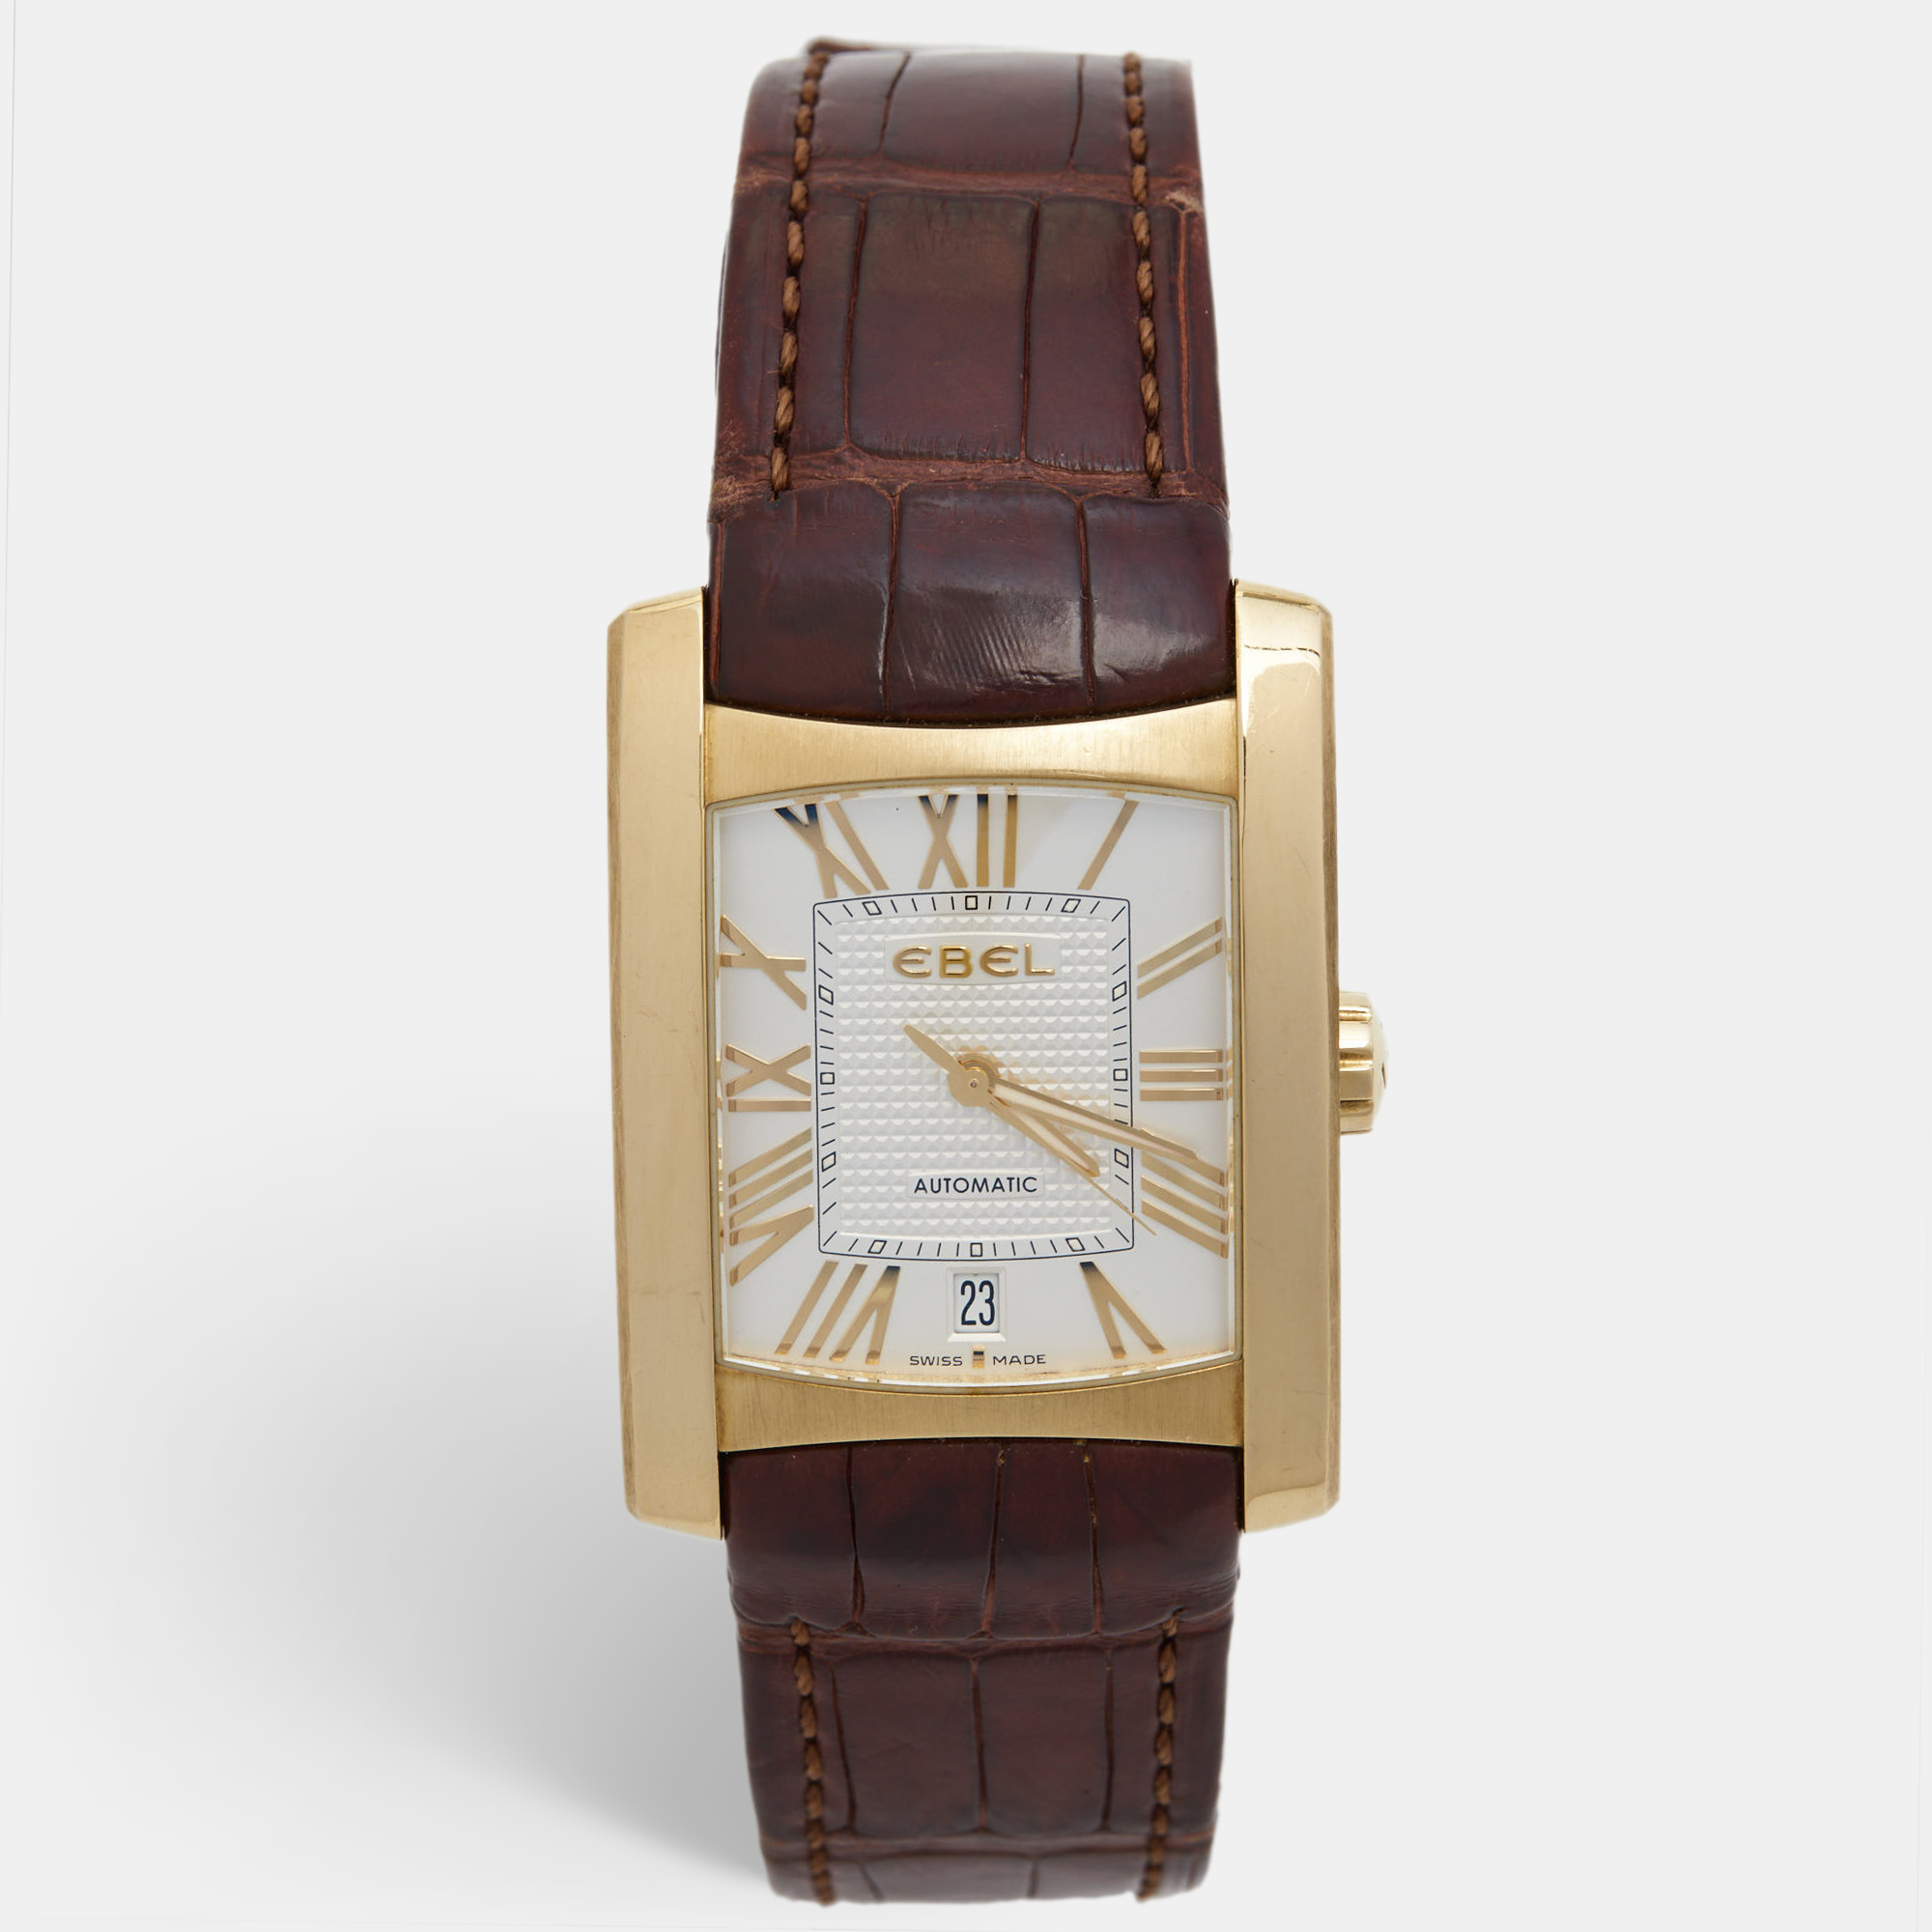 This elegant wristwatch from Ebel will surely assist your style wherever you go. It is crafted from quality materials and features an 18k yellow gold case. It has an automatic movement that runs with the utmost precision and is finished with a bracelet that secures your wrist comfortably.